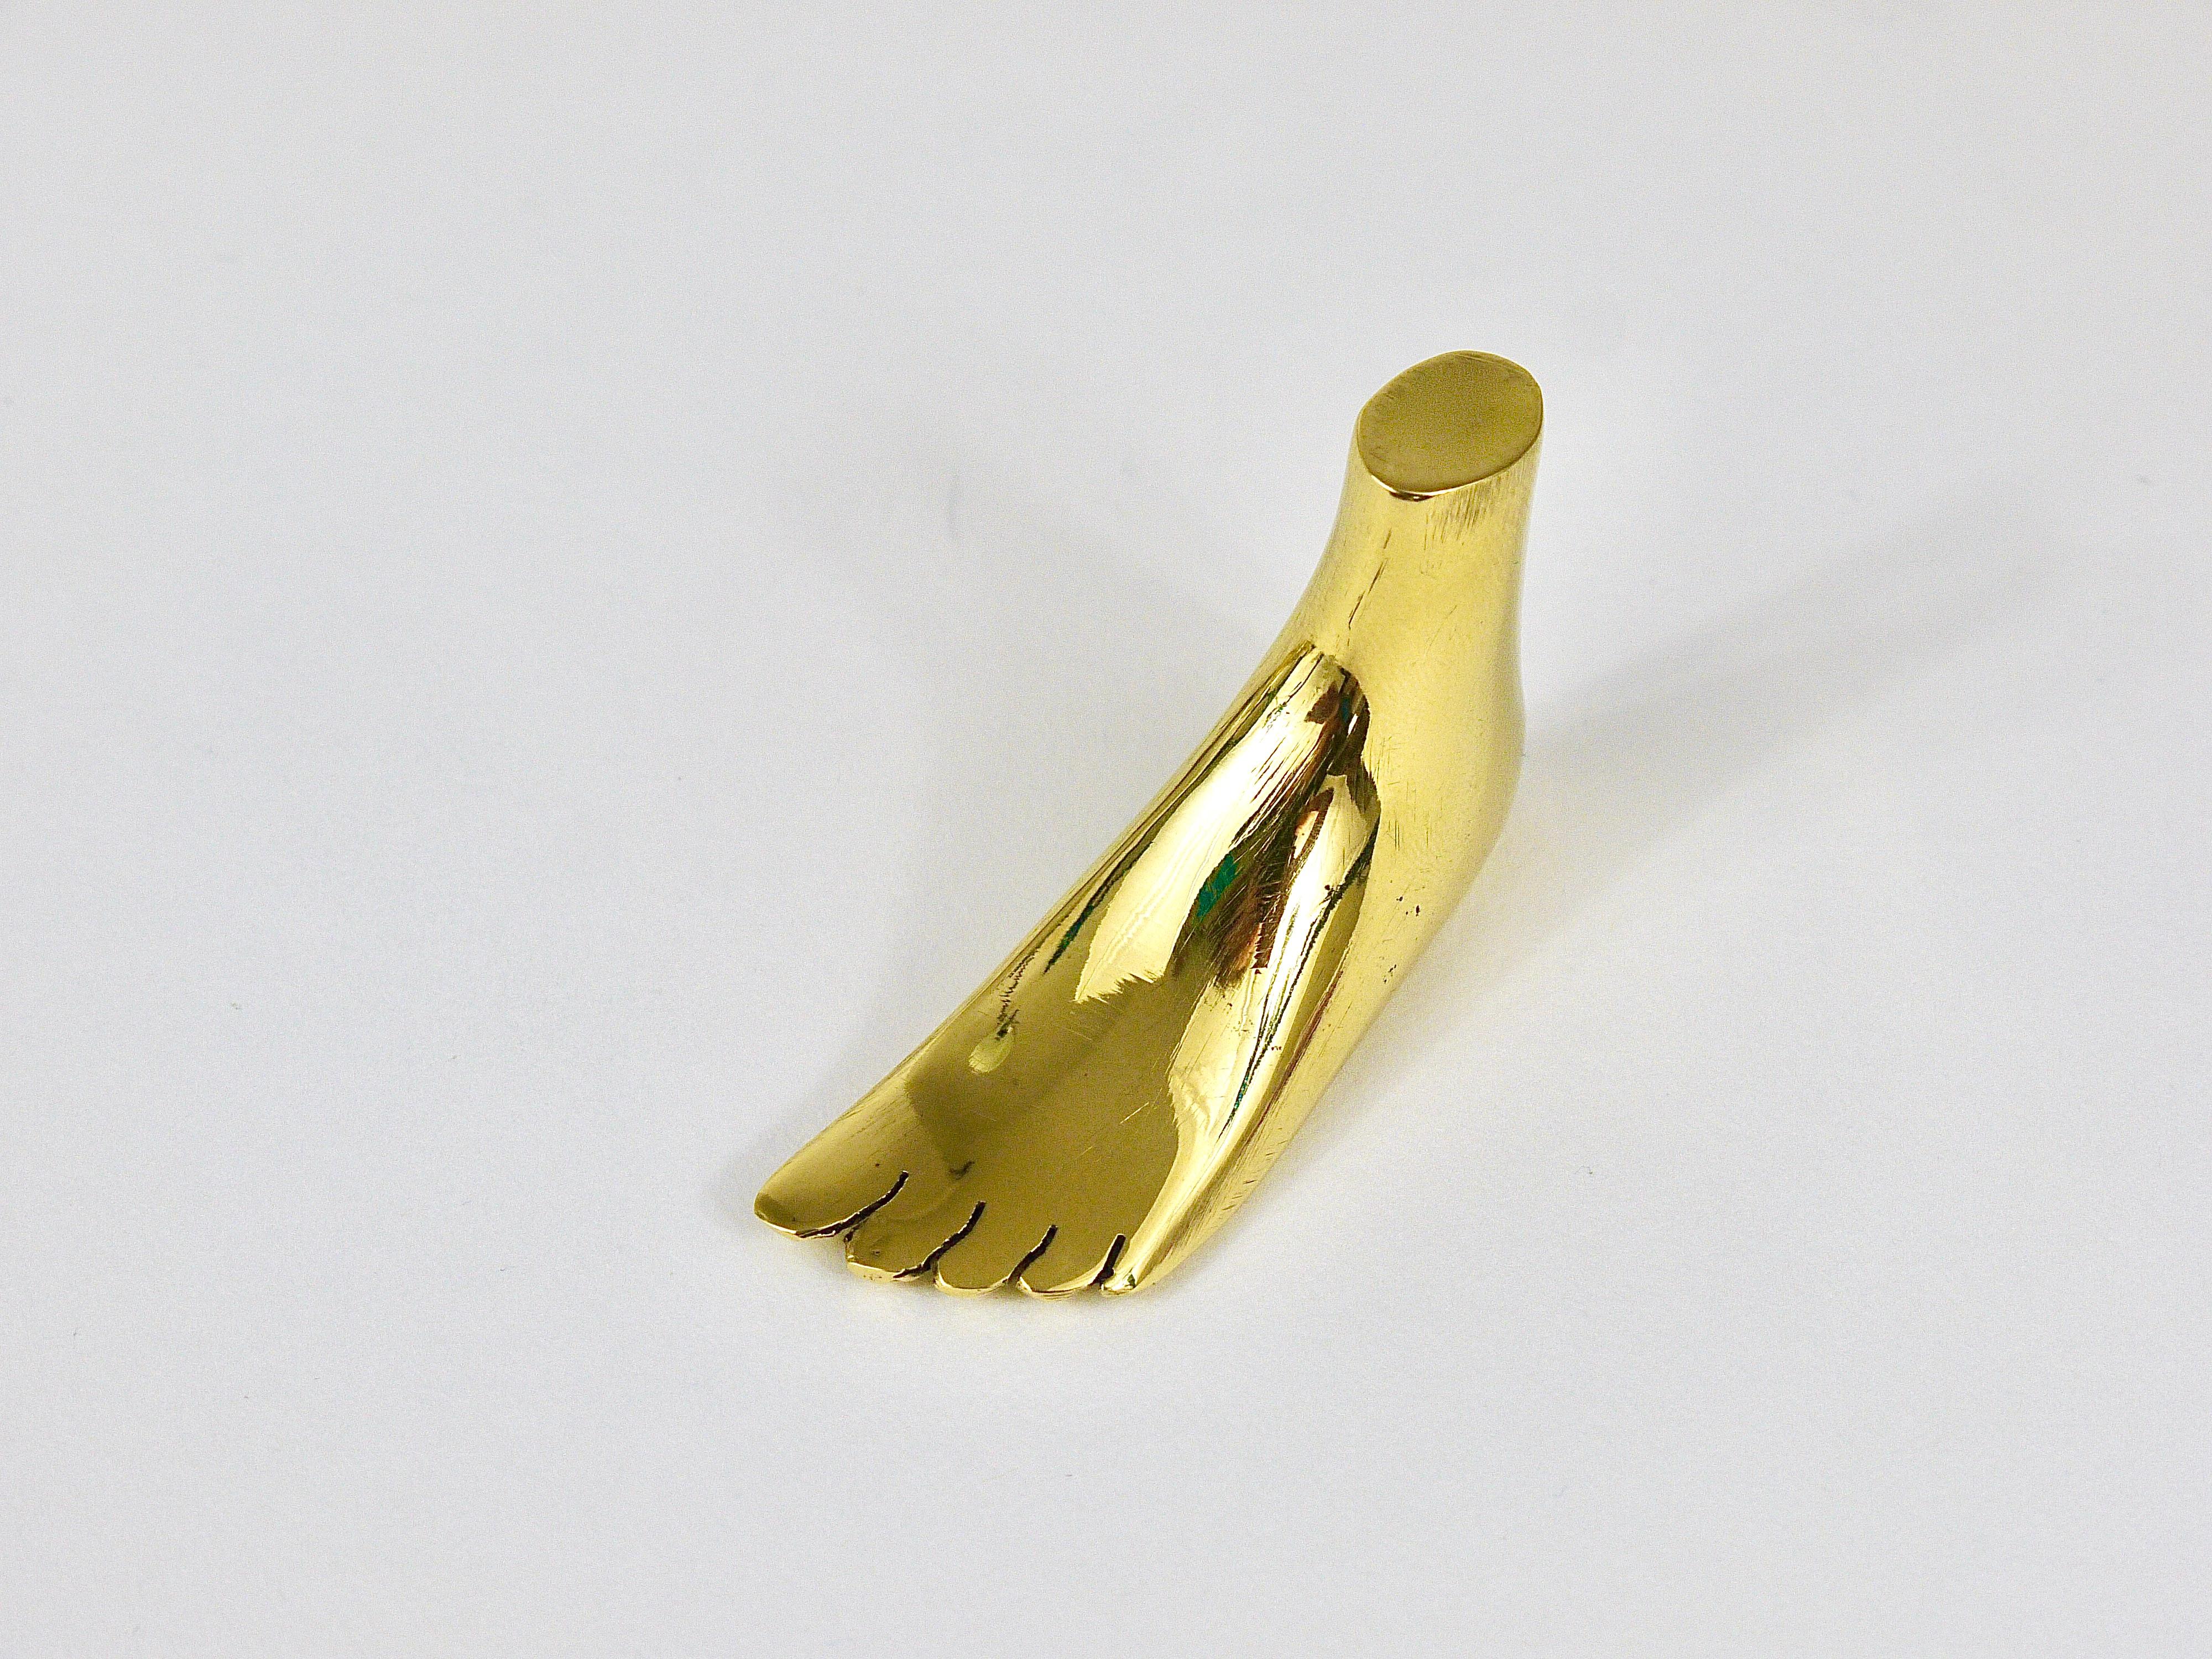 Signed Carl Auböck Midcentury Brass Foot Paperweight Handmade Sculpture In Excellent Condition For Sale In Vienna, AT